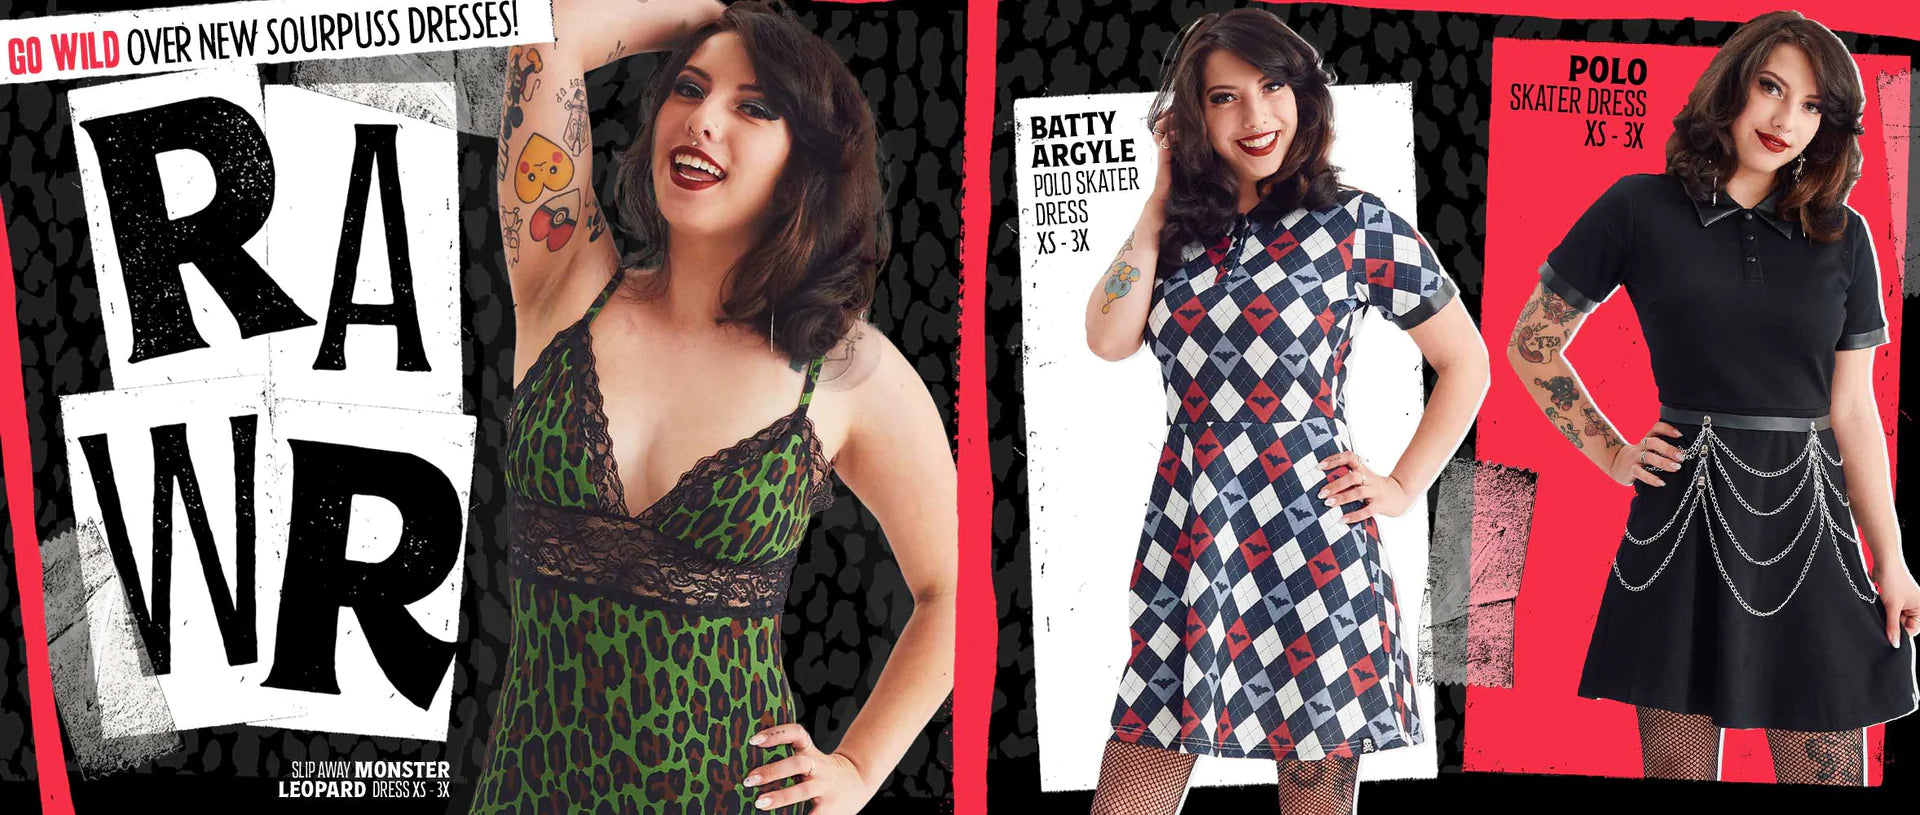 A New Sourpuss Dress for Every Day of The Week!